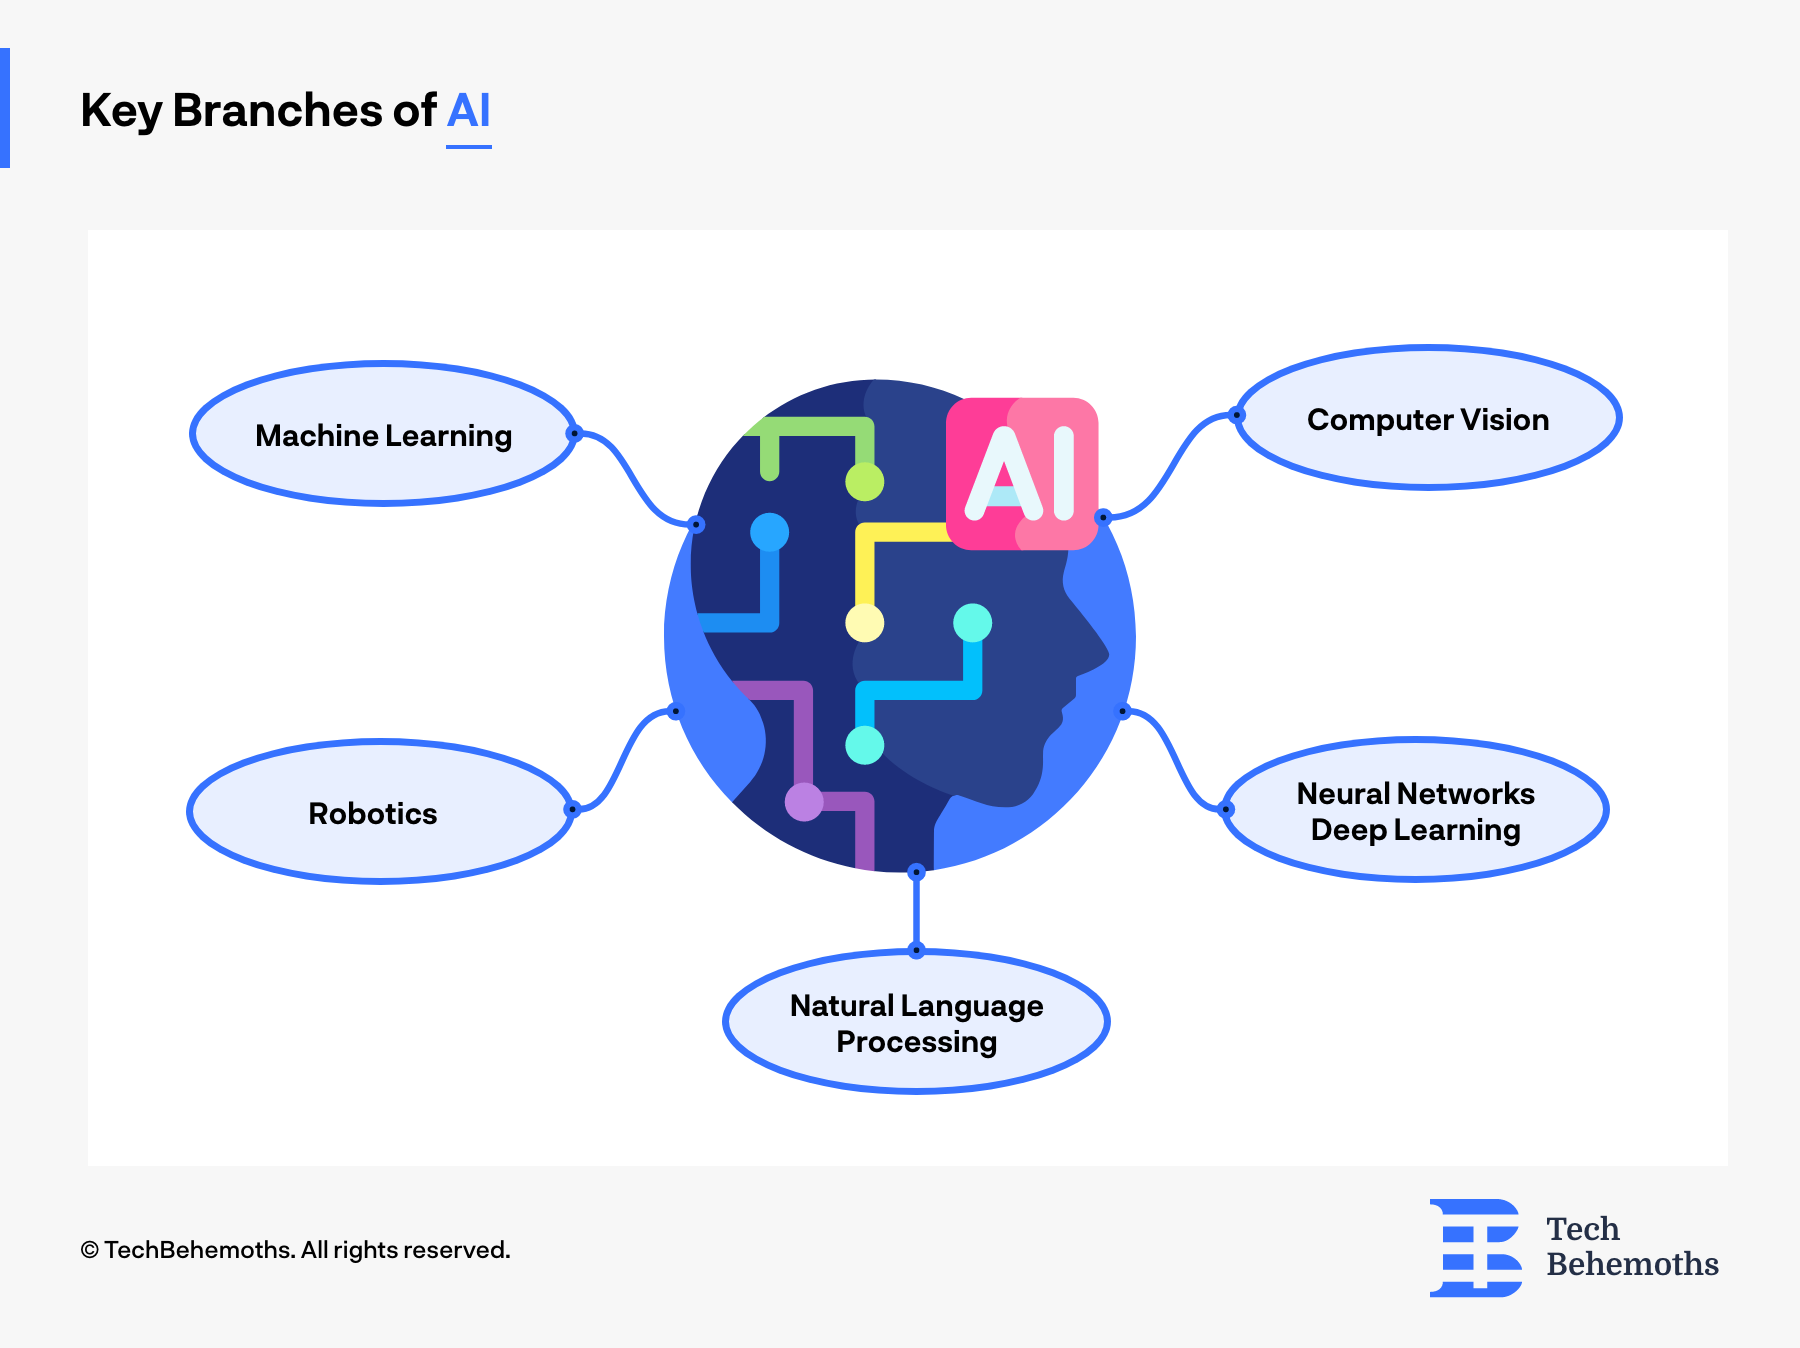 Key Branches of AI